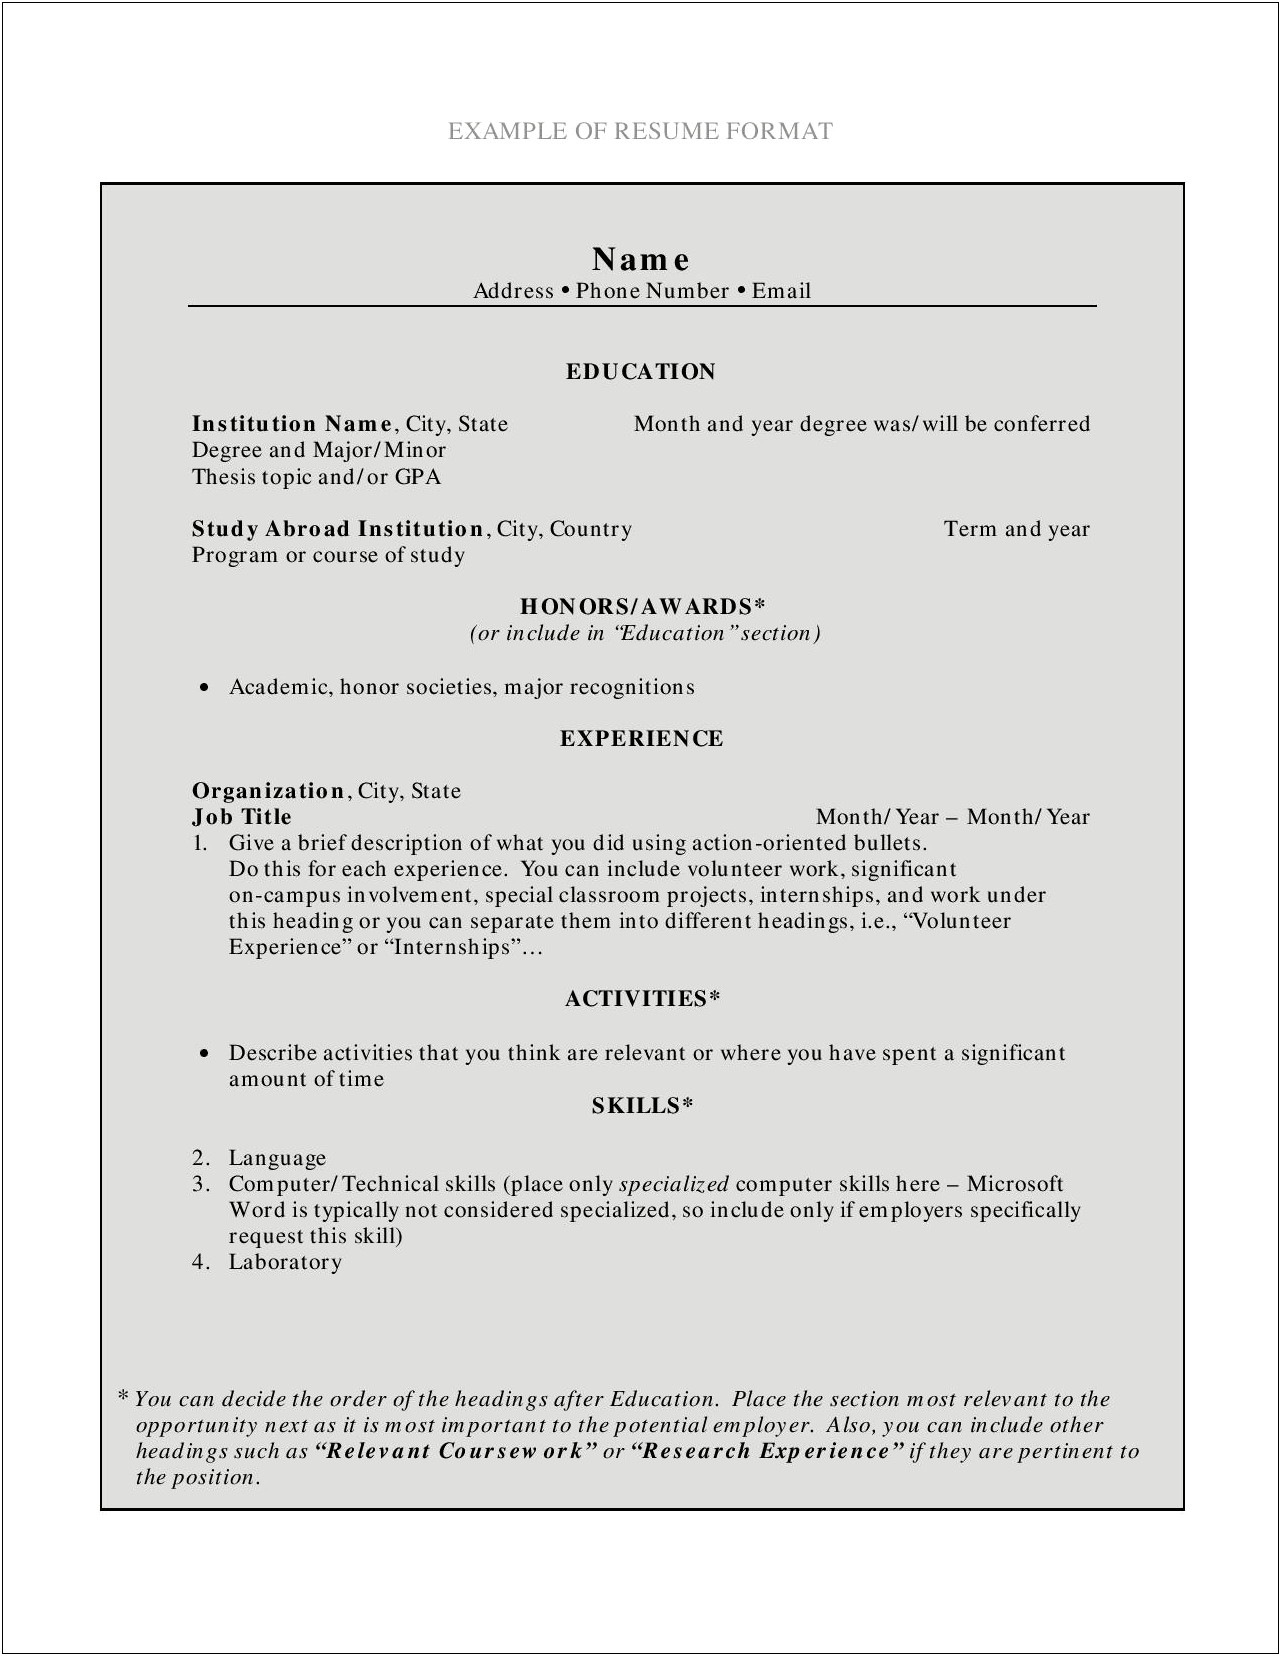 Examples Of Headers On An Education Resume